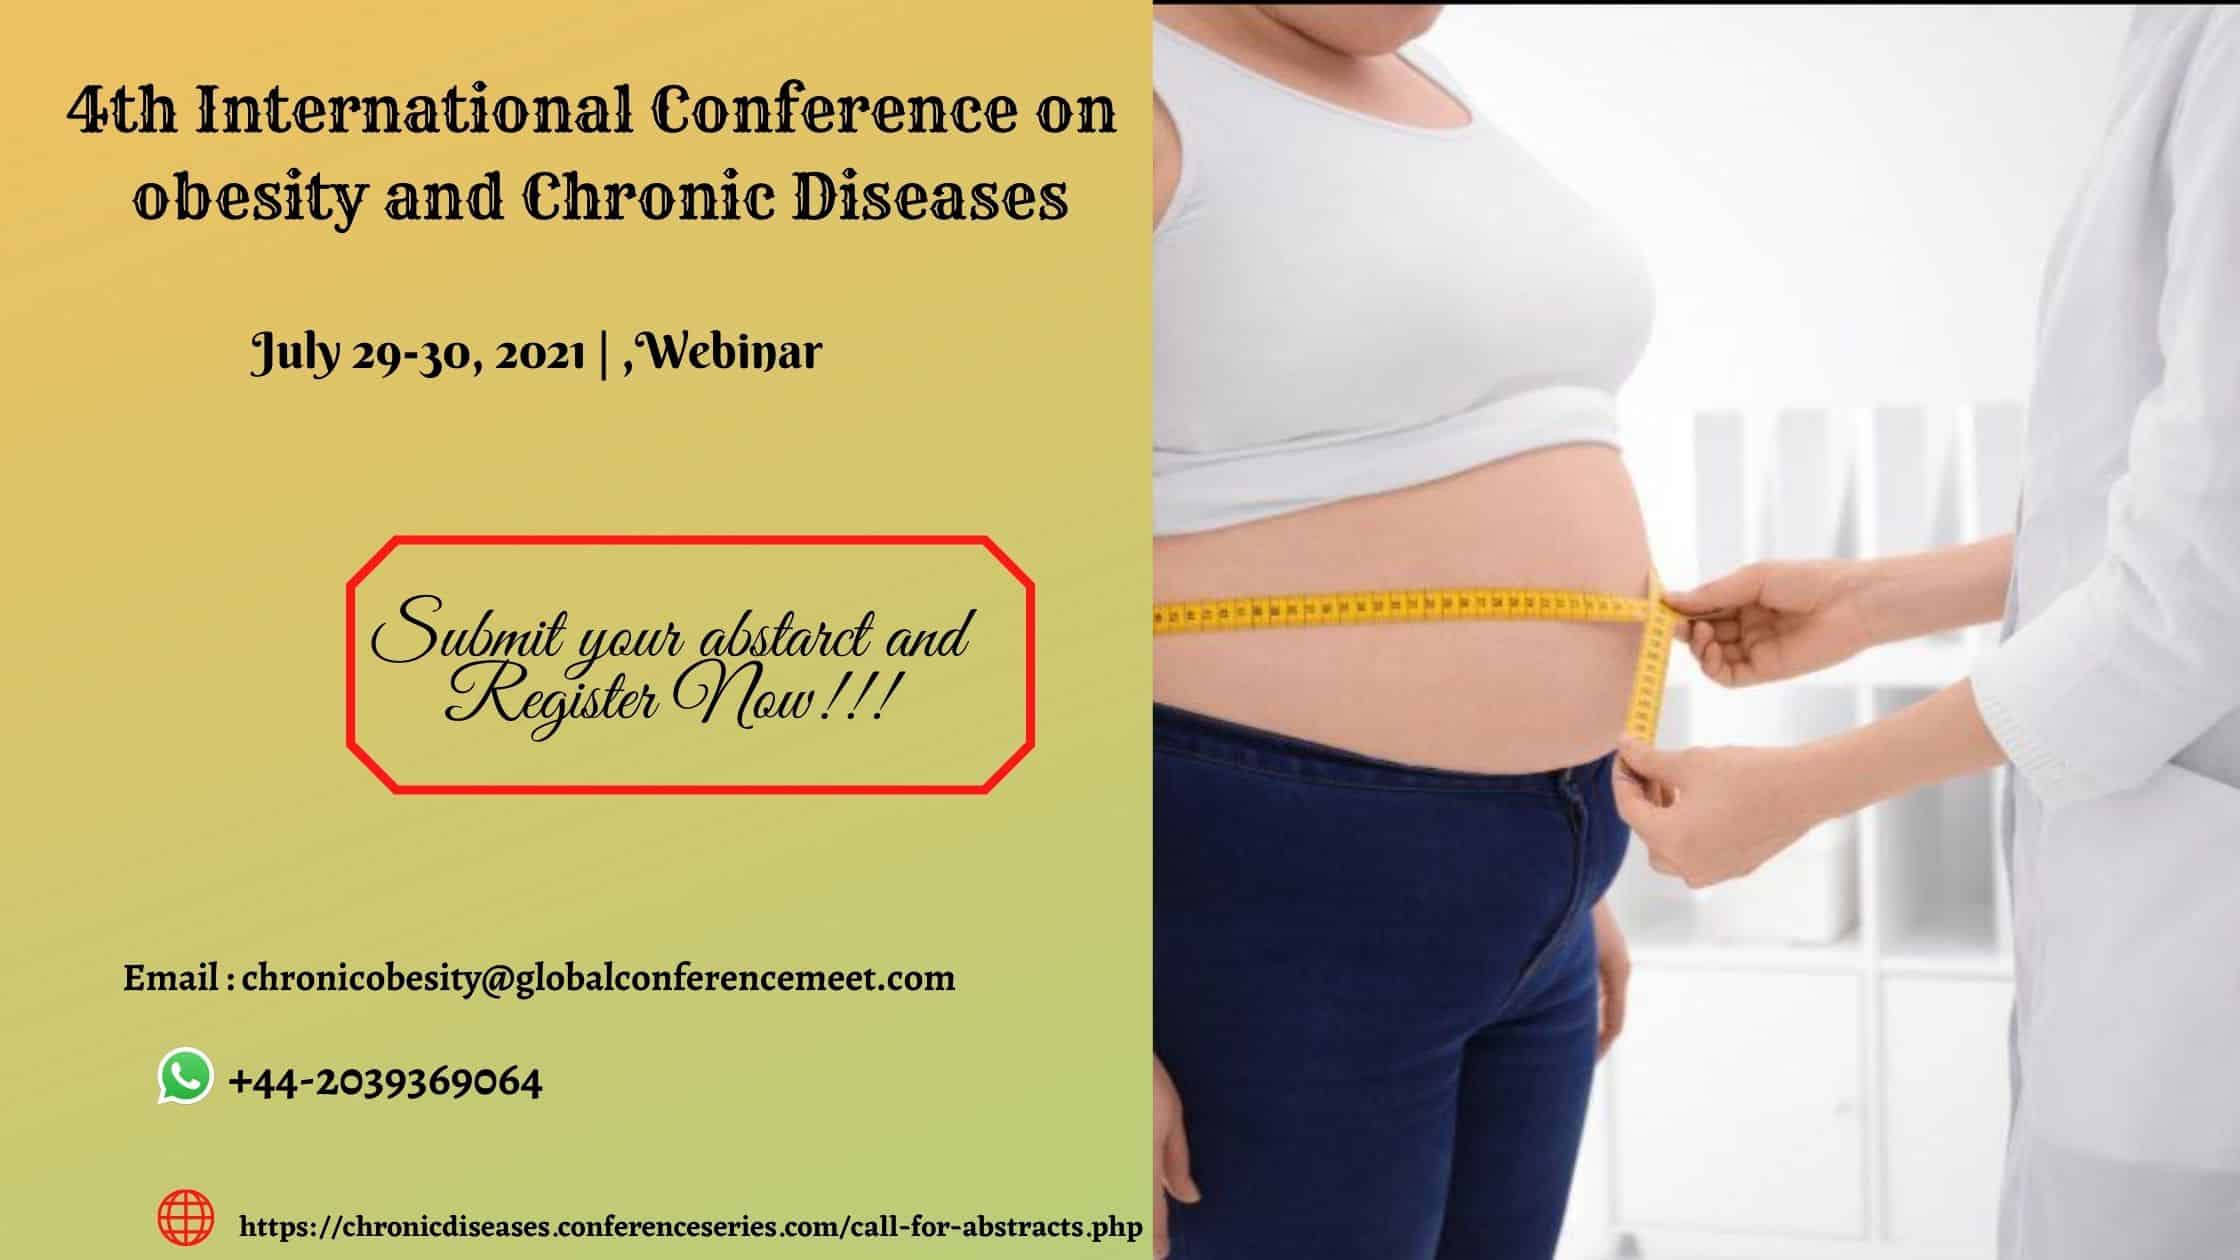 4th International Conference on Obesity and Chronic Diseases BC's